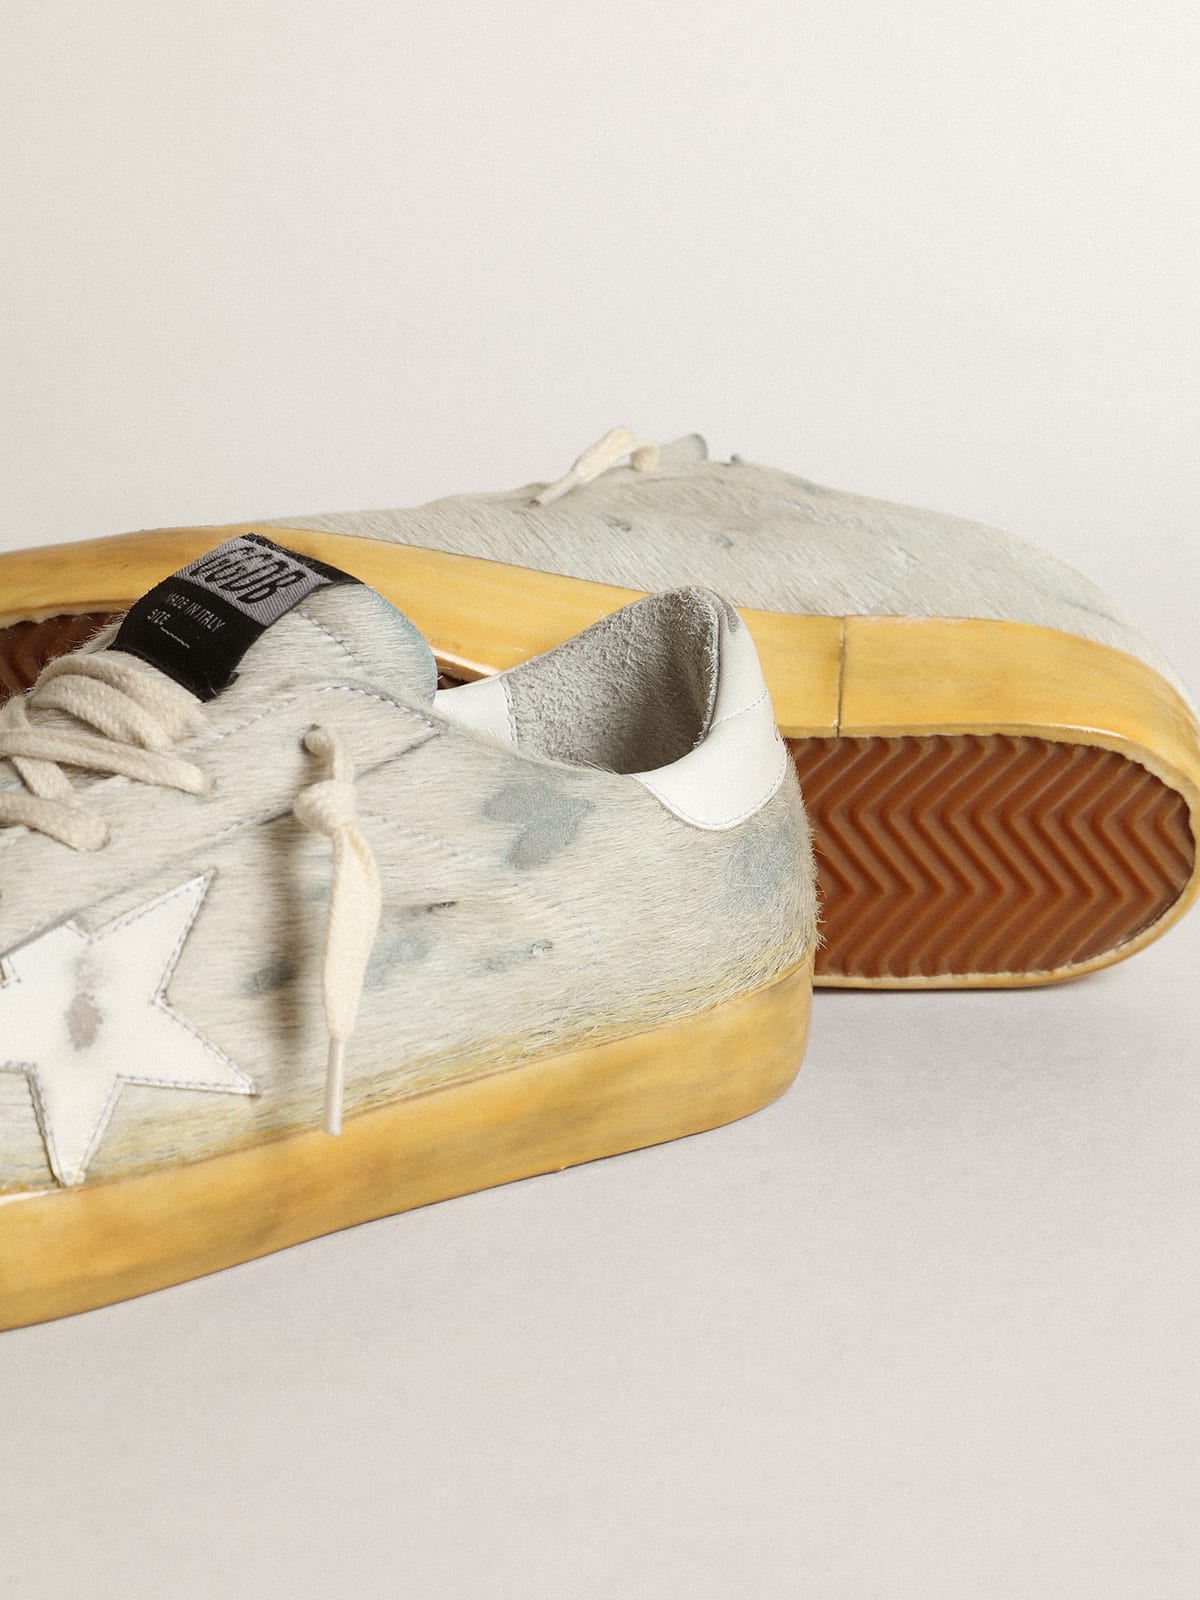 Golden Goose - Super-Star Penstar sneakers in off-white pony skin with white leather star and heel tab in 